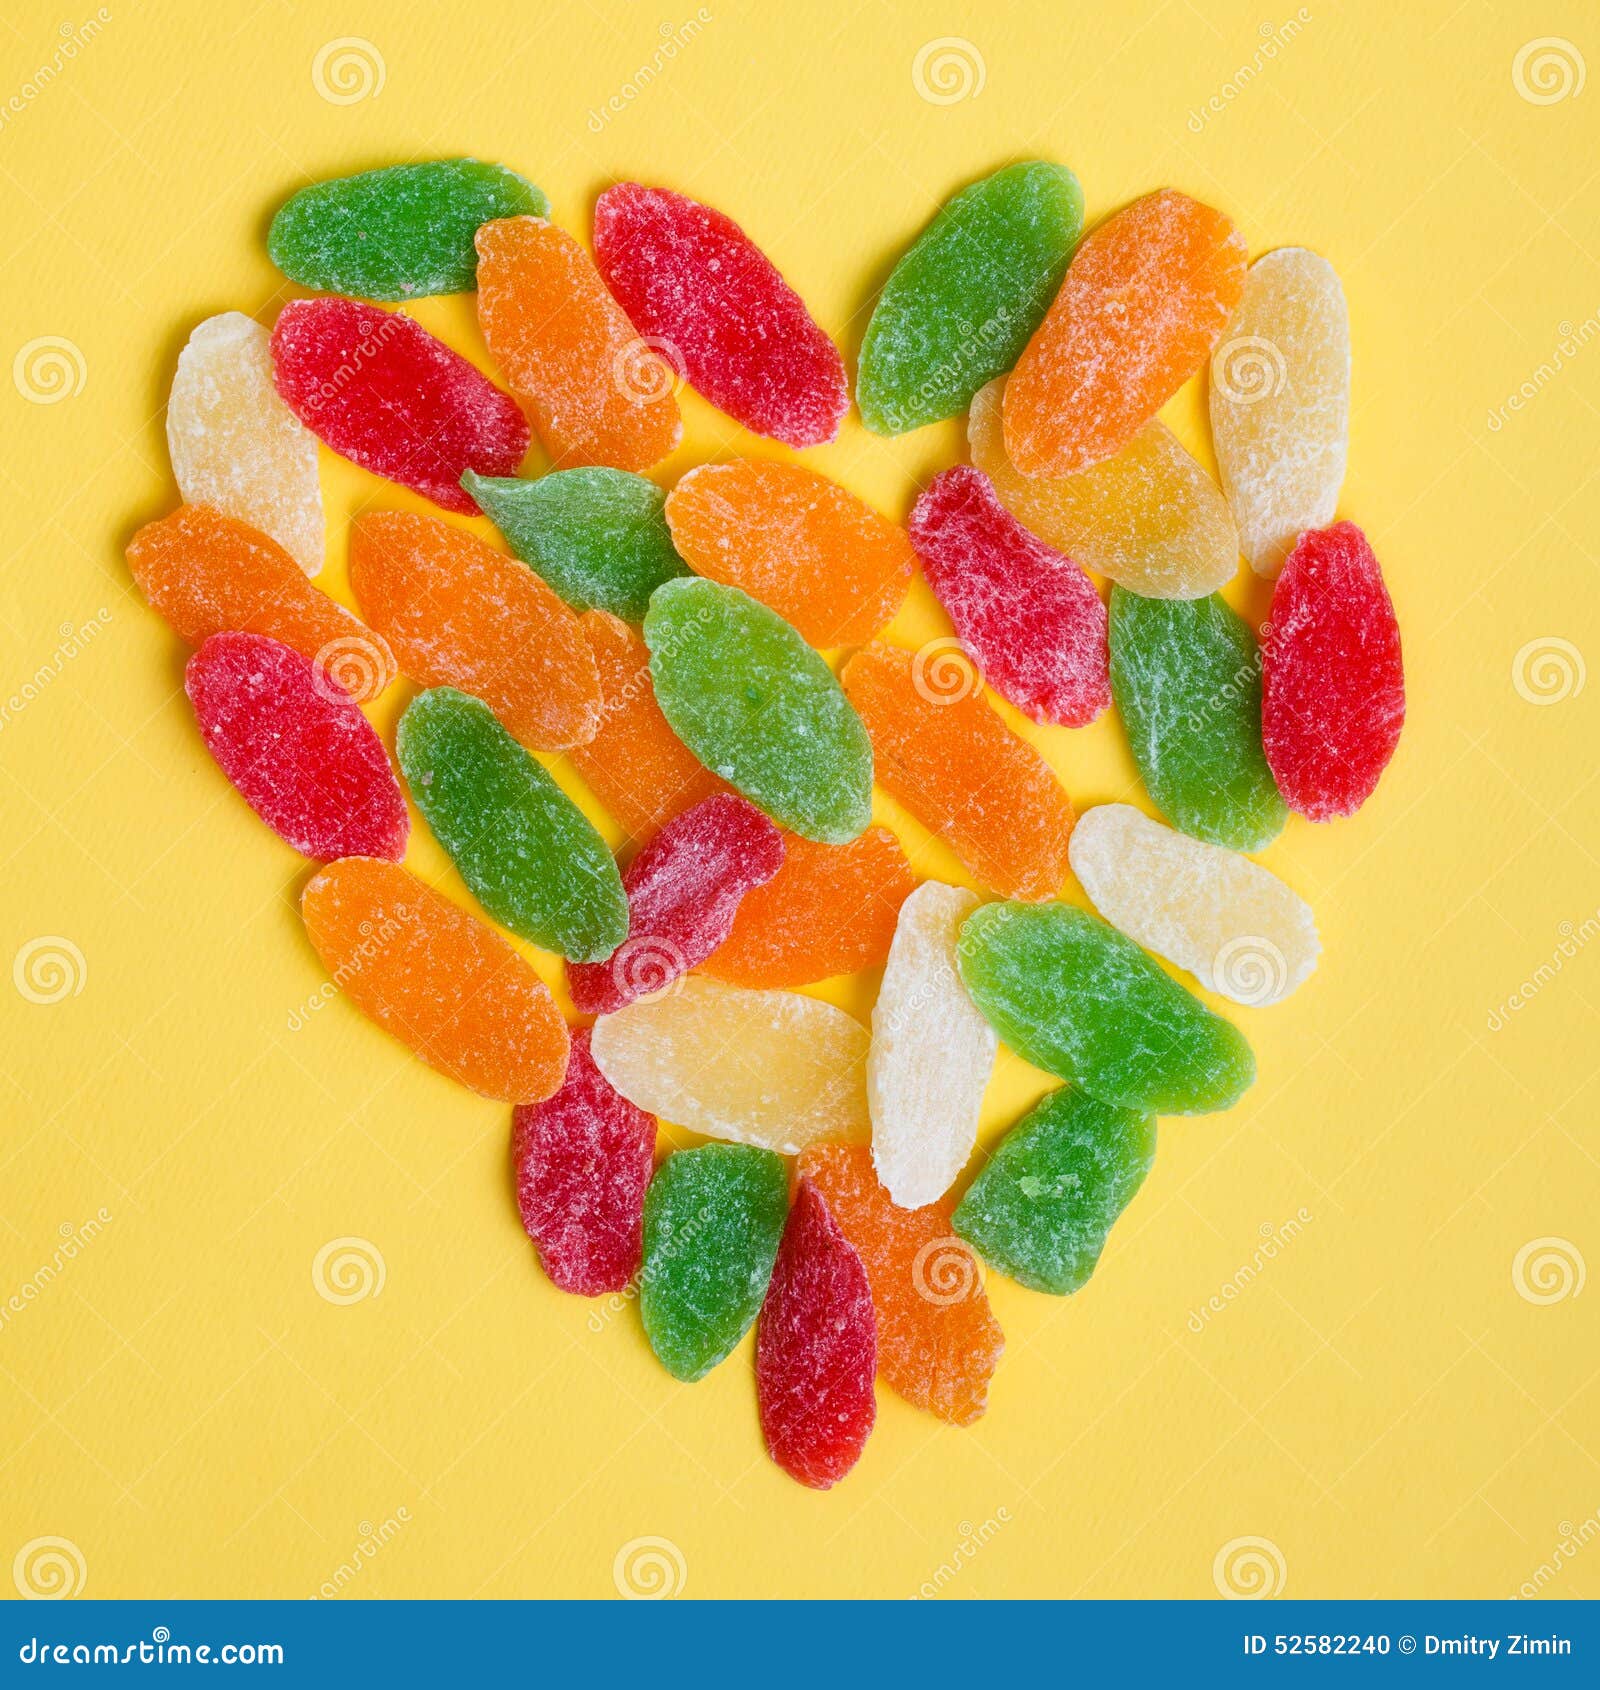 Candied dried fruits stock photo. Image of slice, colourful - 52582240